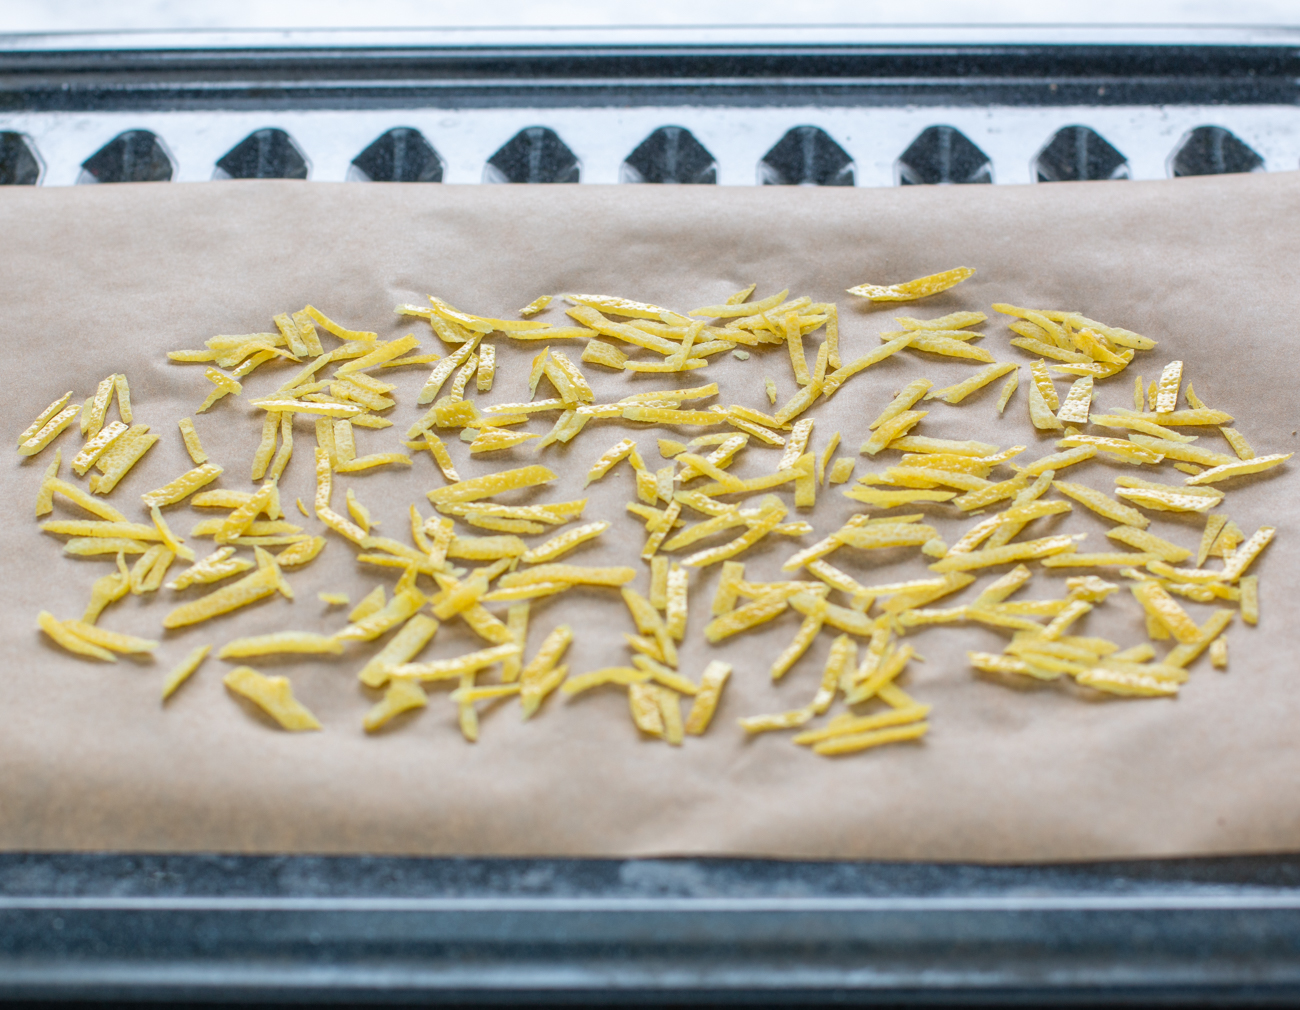 To dry lemon peels - dehydrate at 200 degrees 